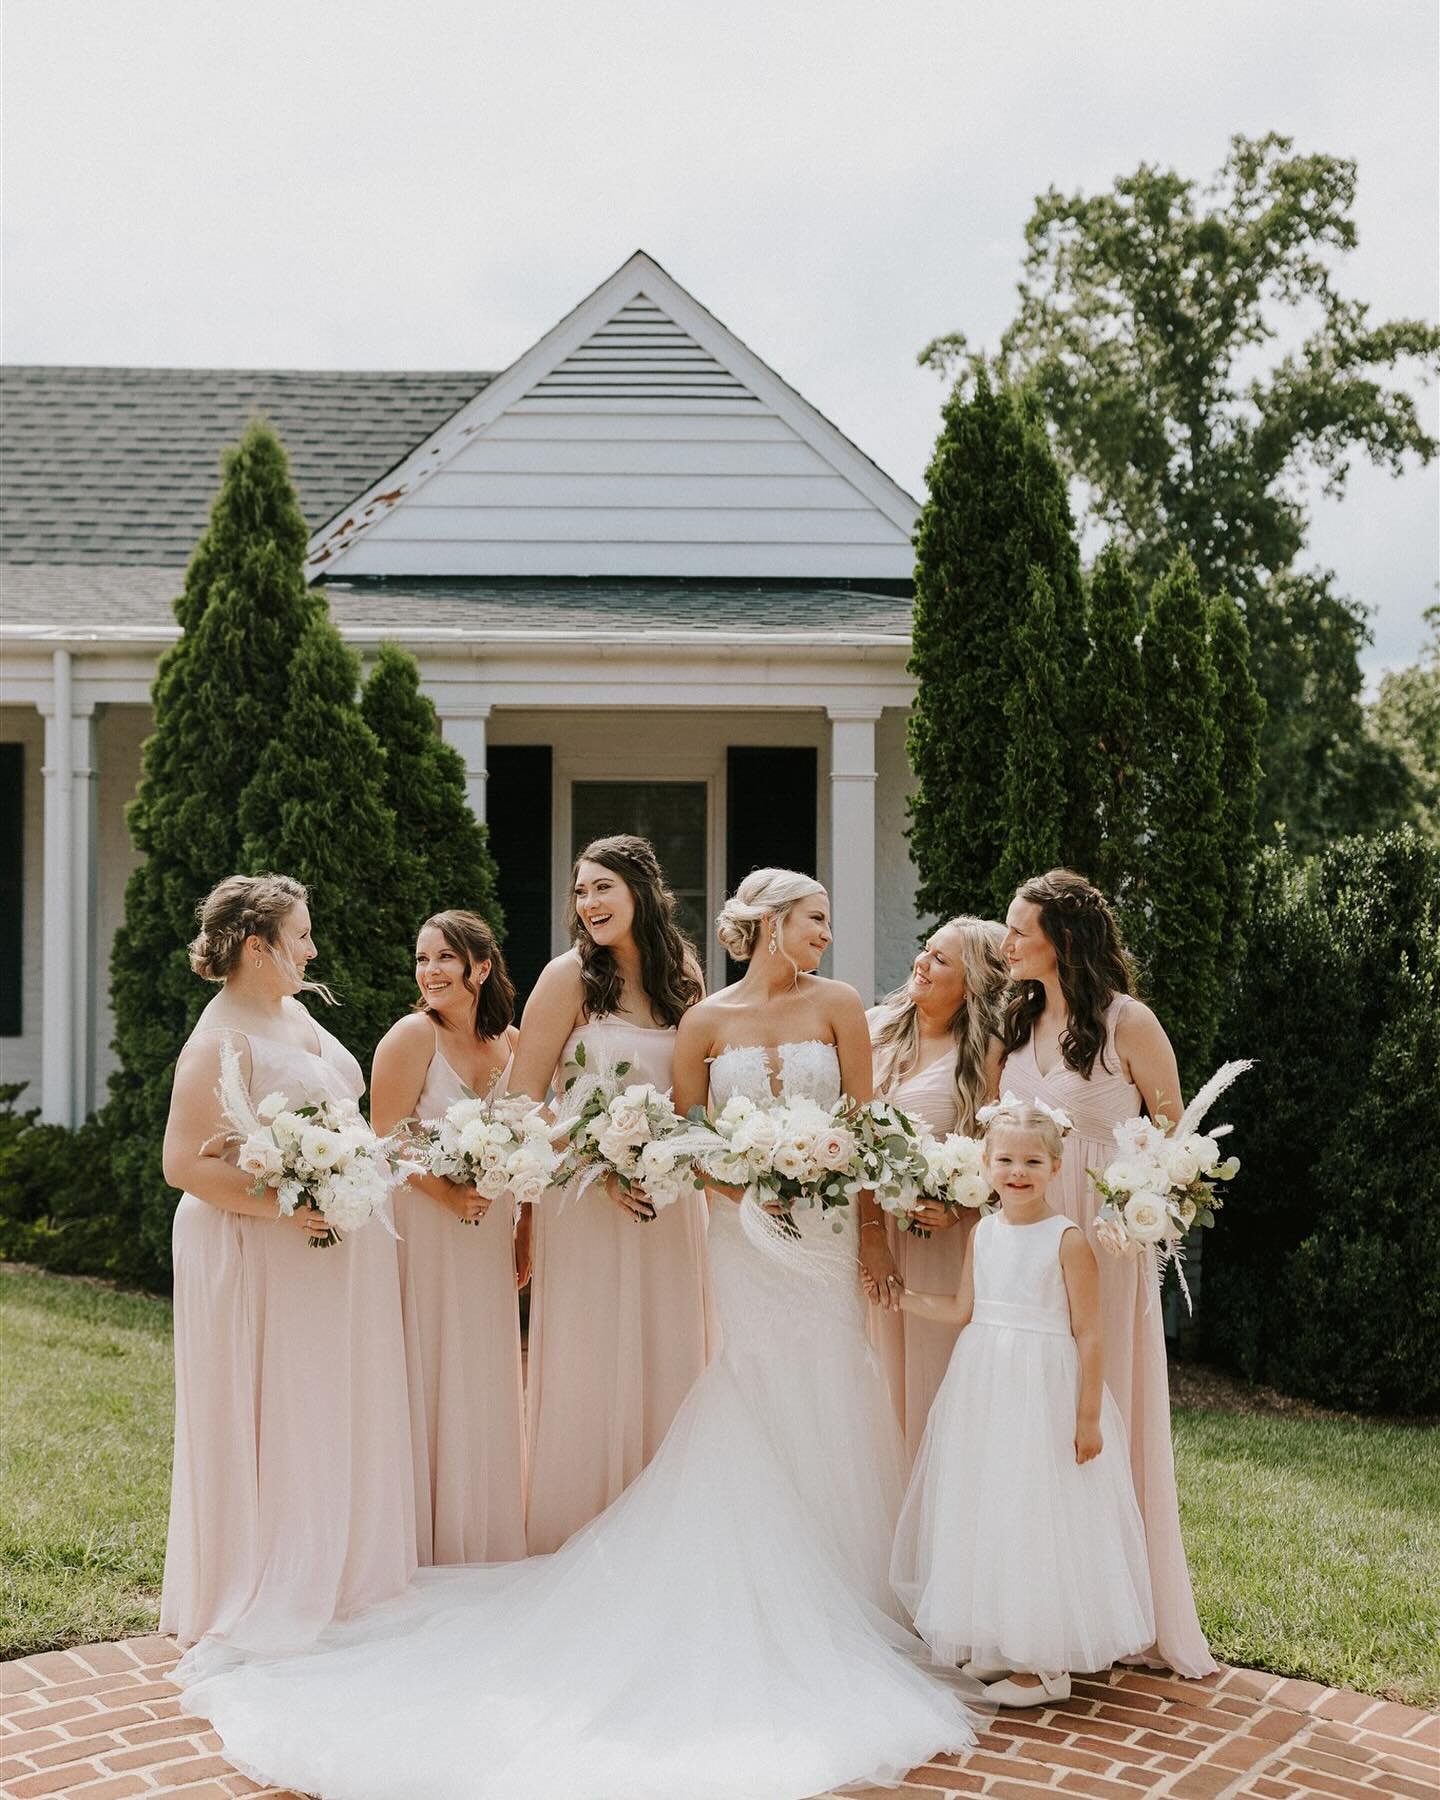 Over the years we have been obsessed with some of the trends surrounding bridesmaids ! From the mix match dresses, to having each girlfriend in a different pattern - we love to see it all 😍👏🏼! 

When choosing what your girls are going to wear, the